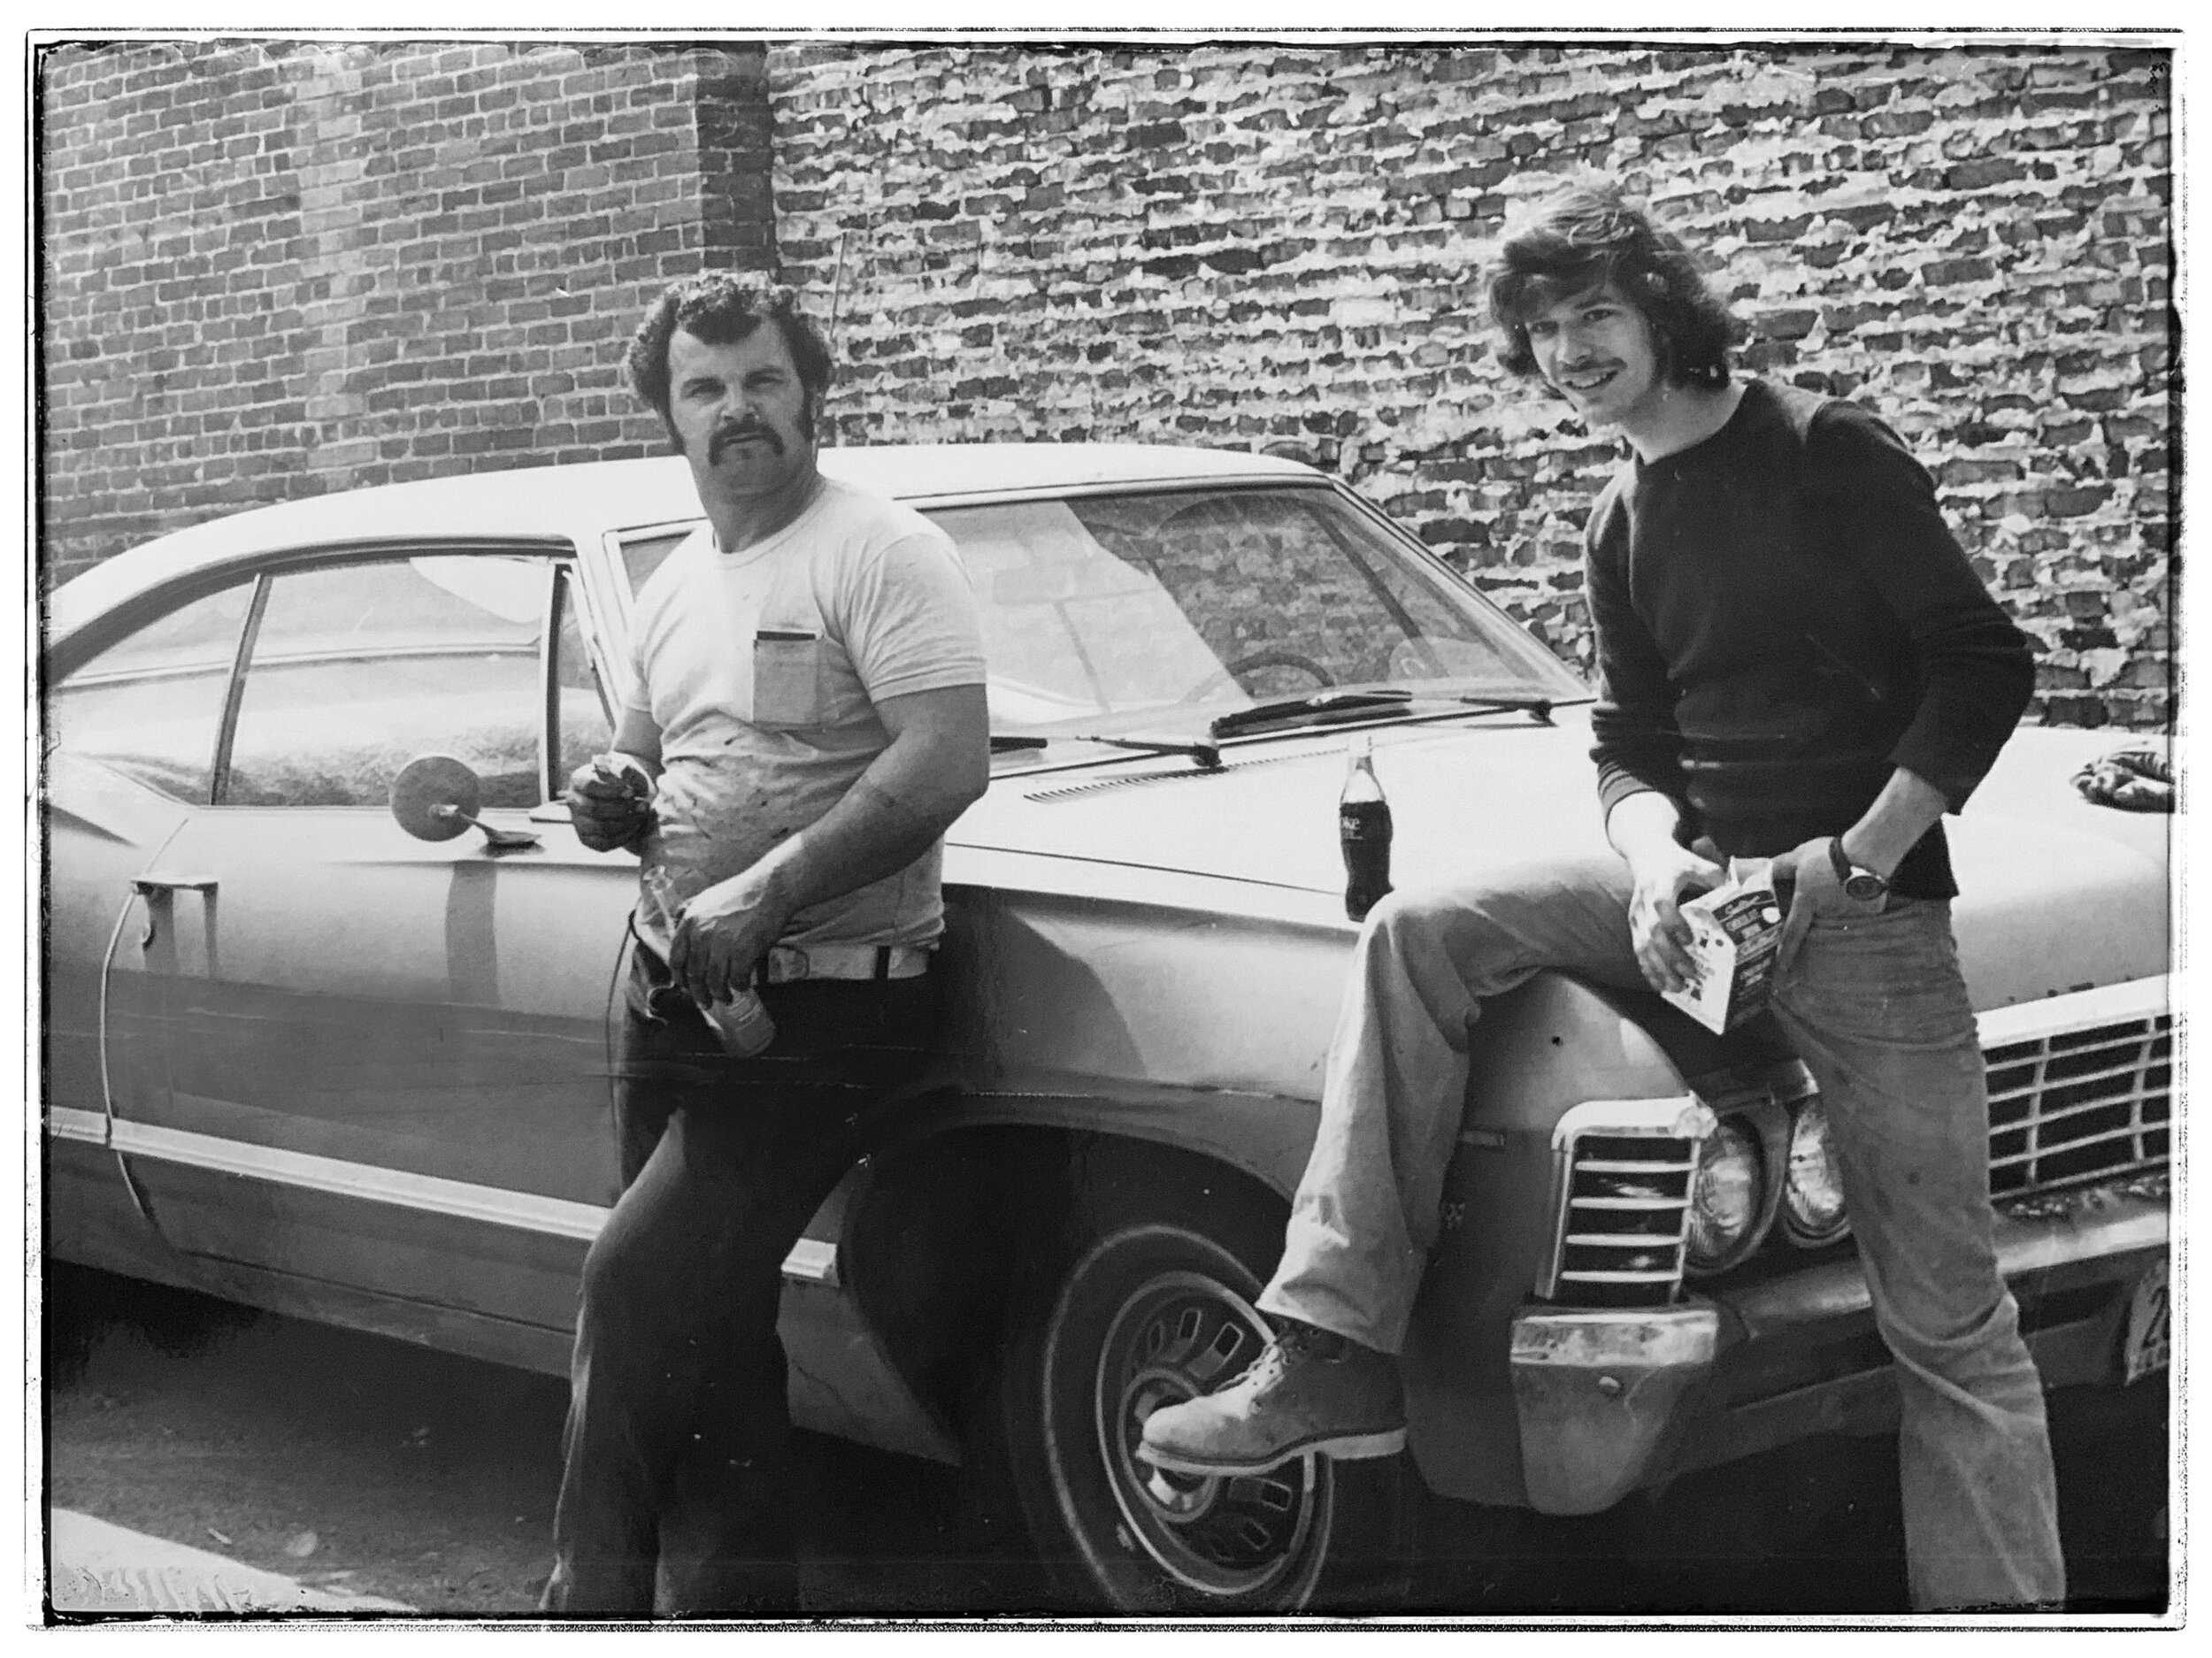 Two Guys on Chevrolet, Montreal, 1973